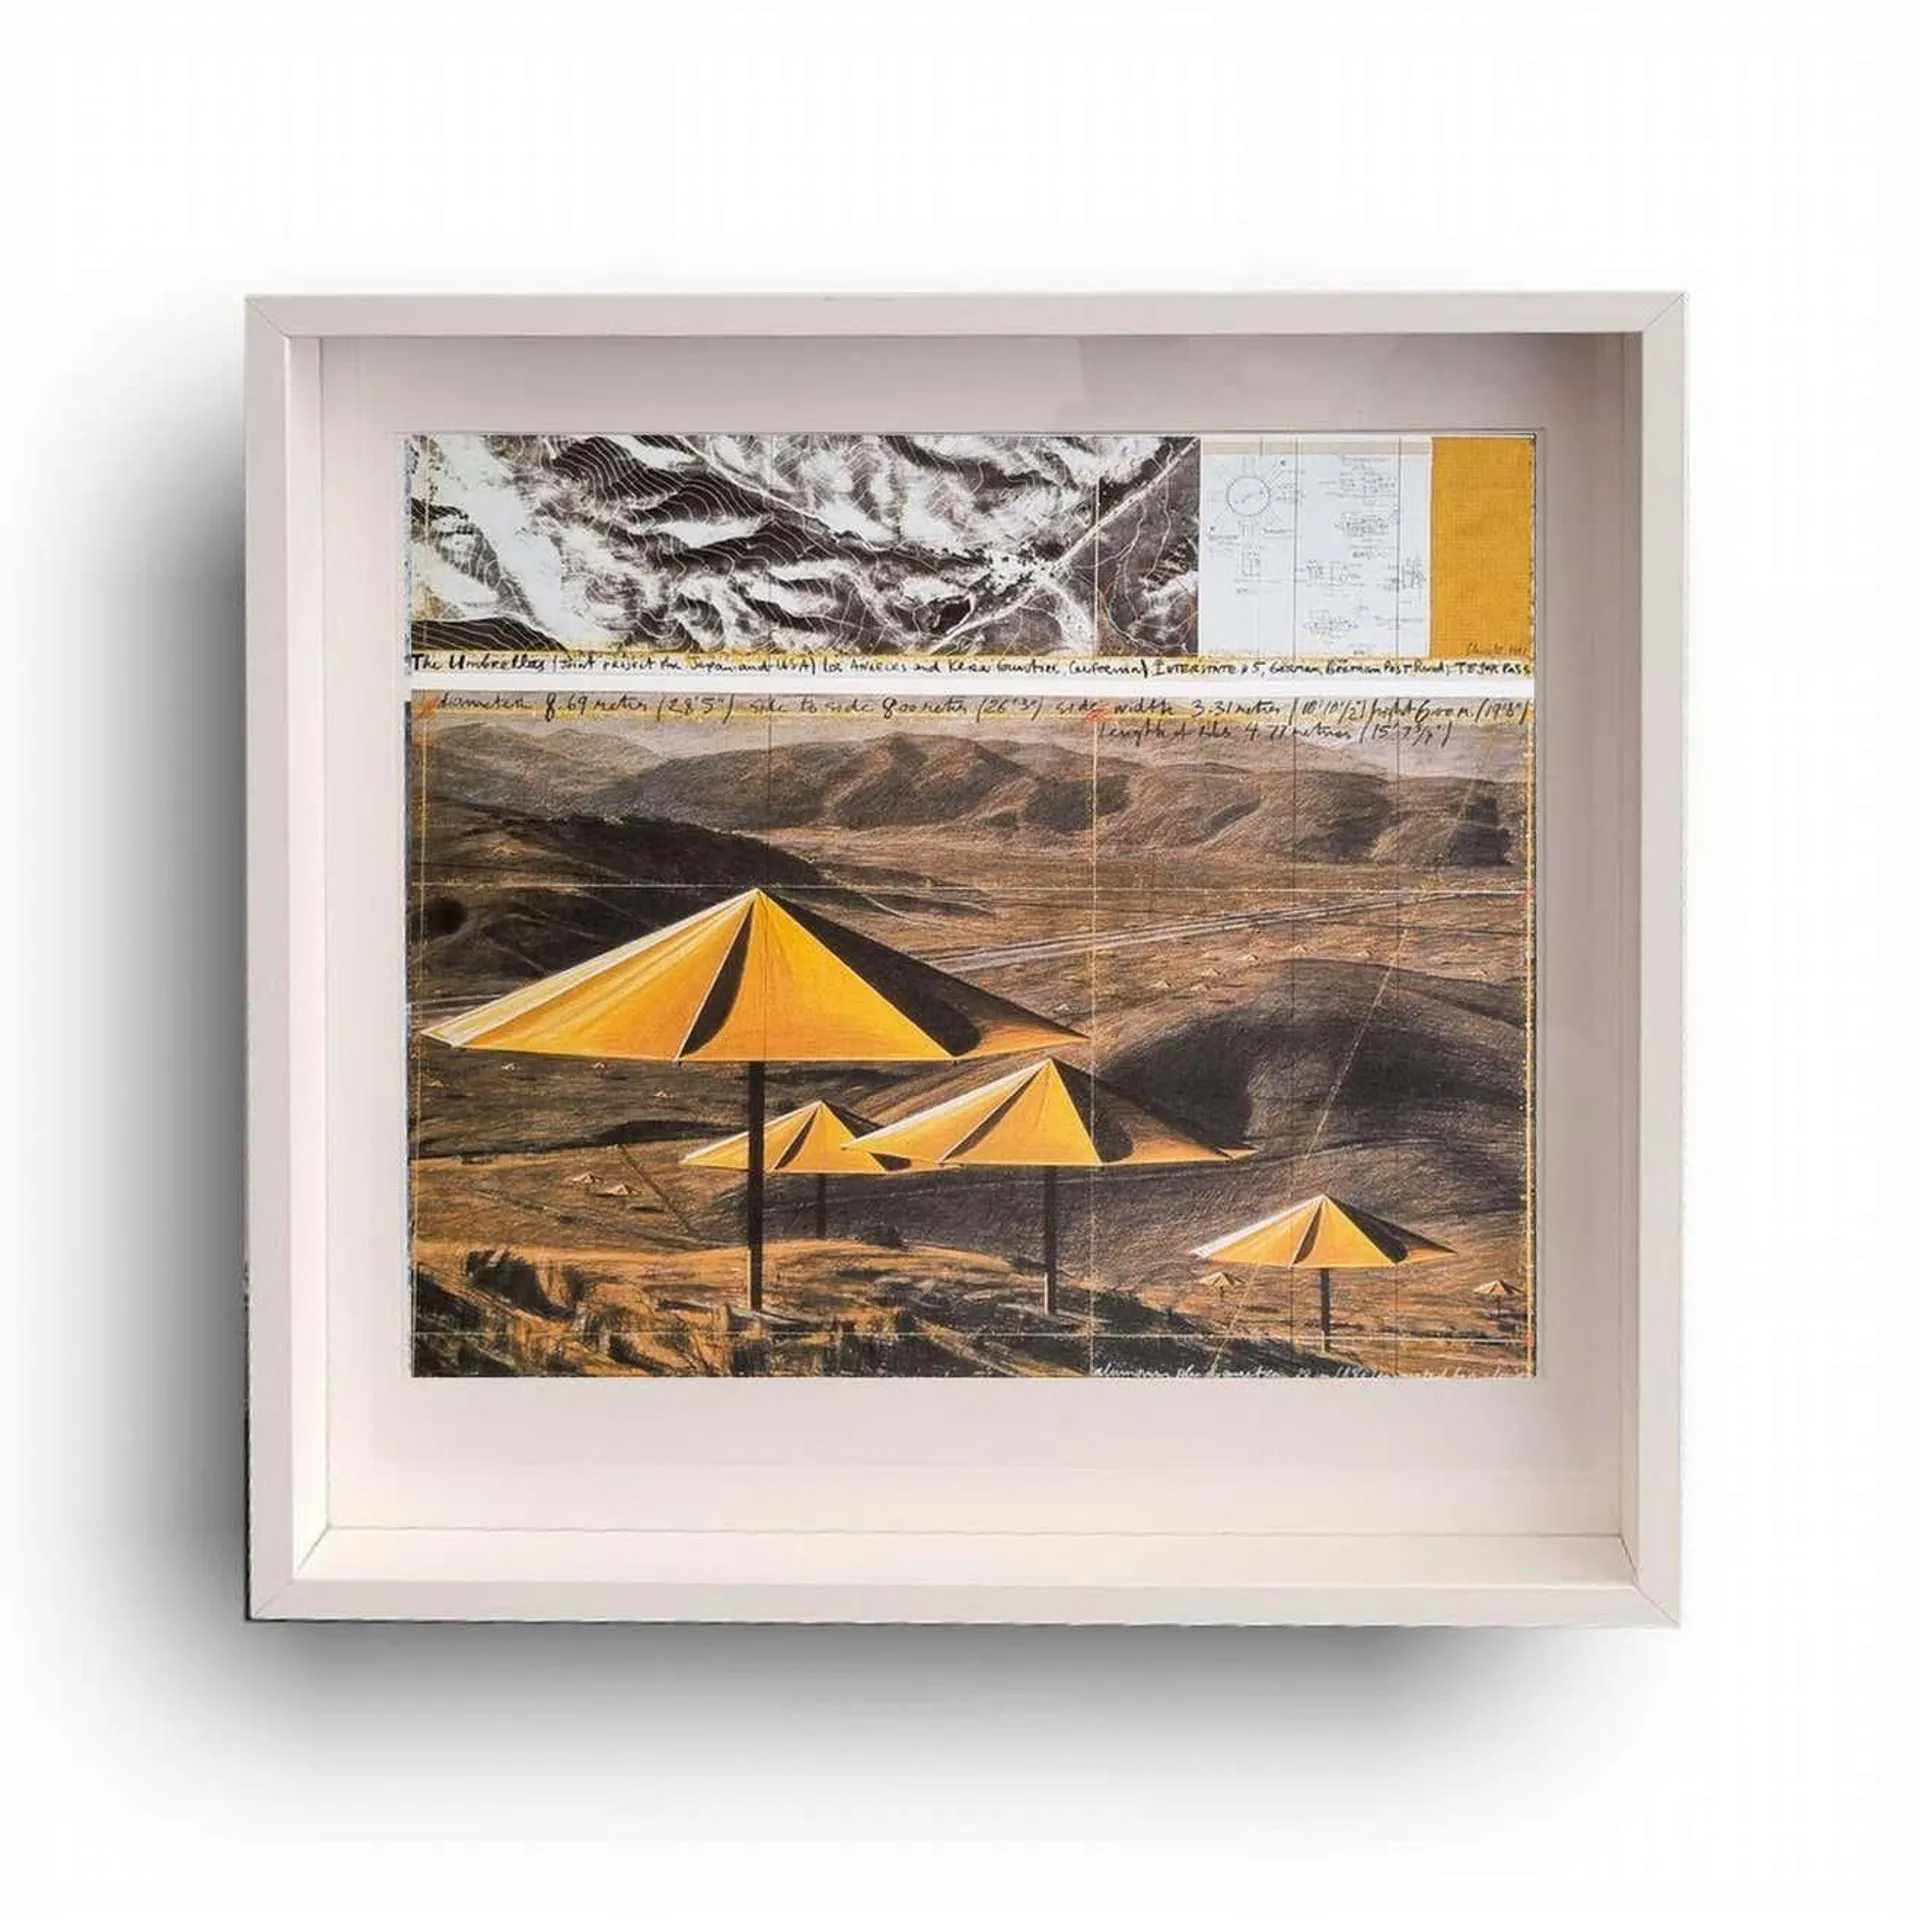 Christo and Jeanne-Claude The Umbrellas (Yellow) 1991